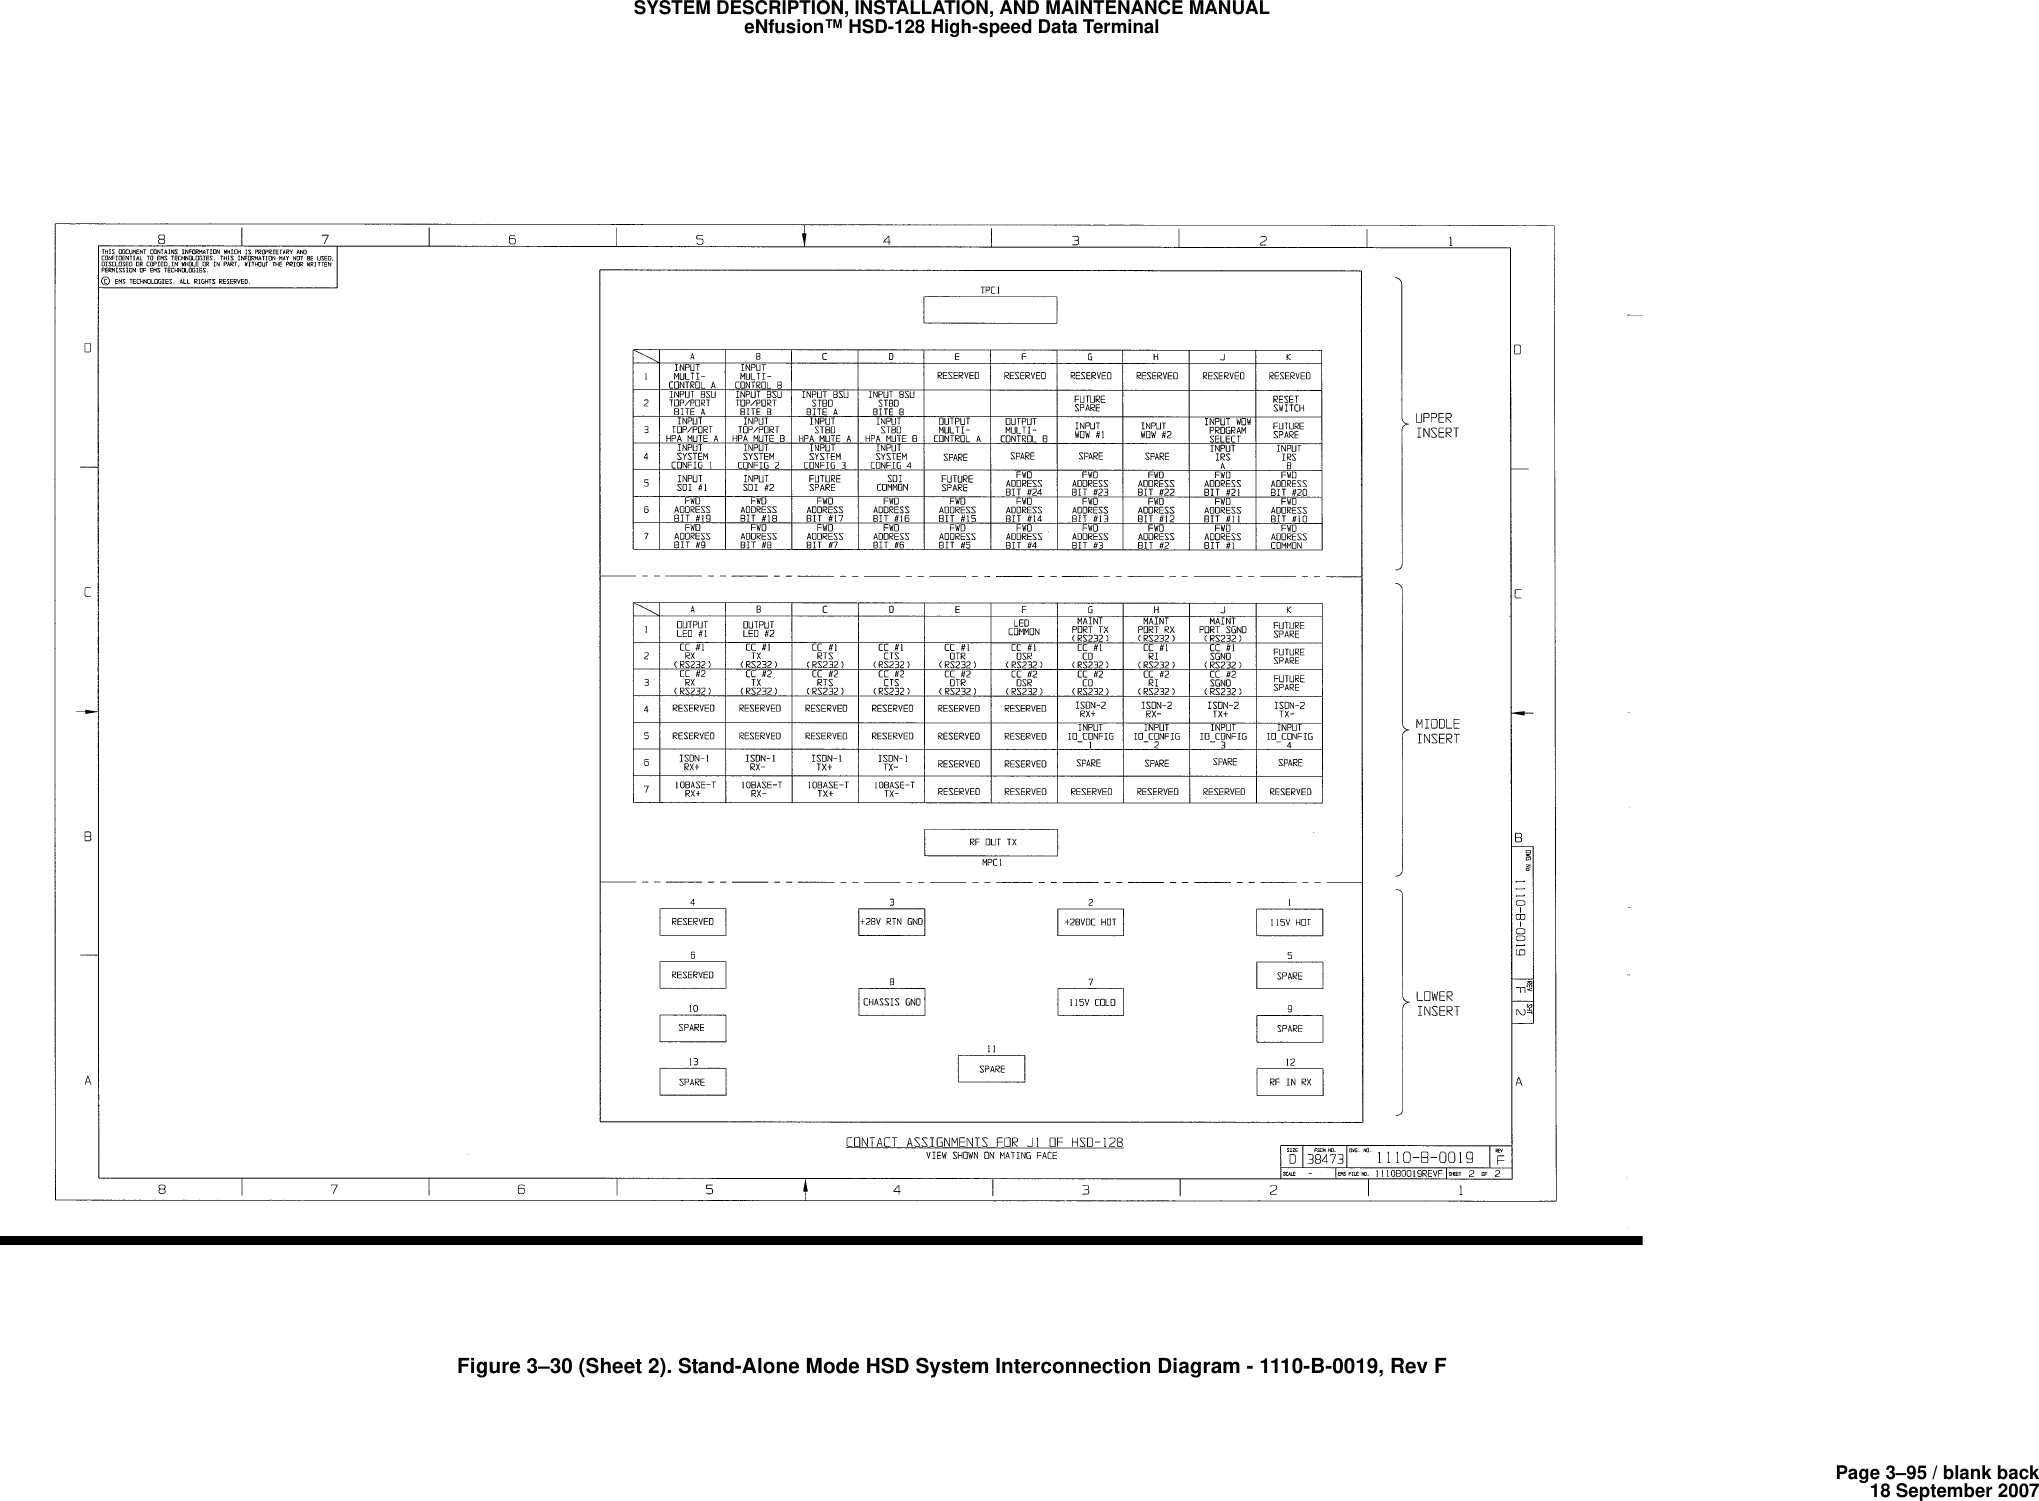 Page 3–95 / blank back18 September 2007SYSTEM DESCRIPTION, INSTALLATION, AND MAINTENANCE MANUALeNfusion™ HSD-128 High-speed Data TerminalFigure 3–30 (Sheet 2). Stand-Alone Mode HSD System Interconnection Diagram - 1110-B-0019, Rev F